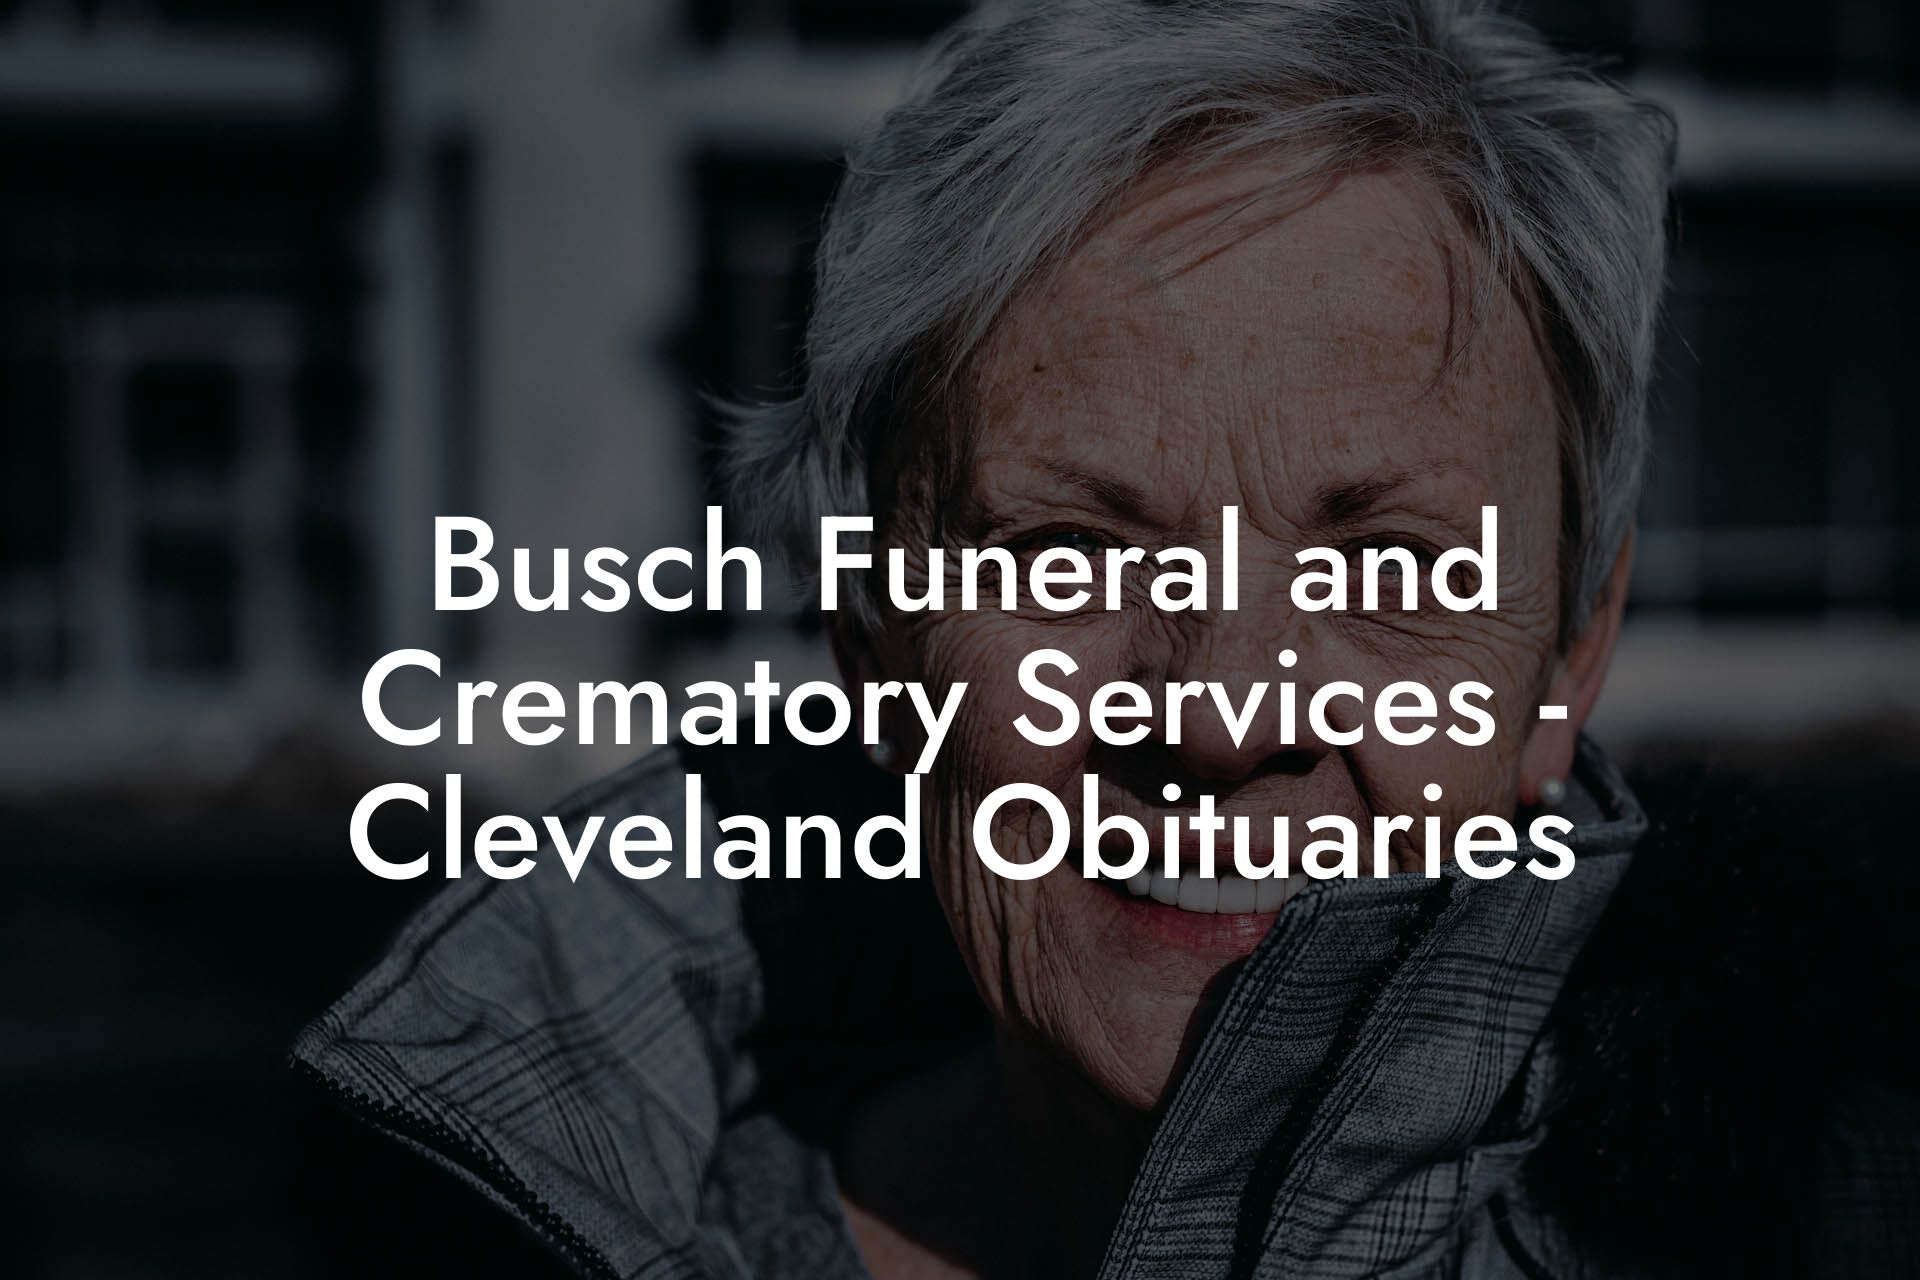 Busch Funeral and Crematory Services - Cleveland Obituaries